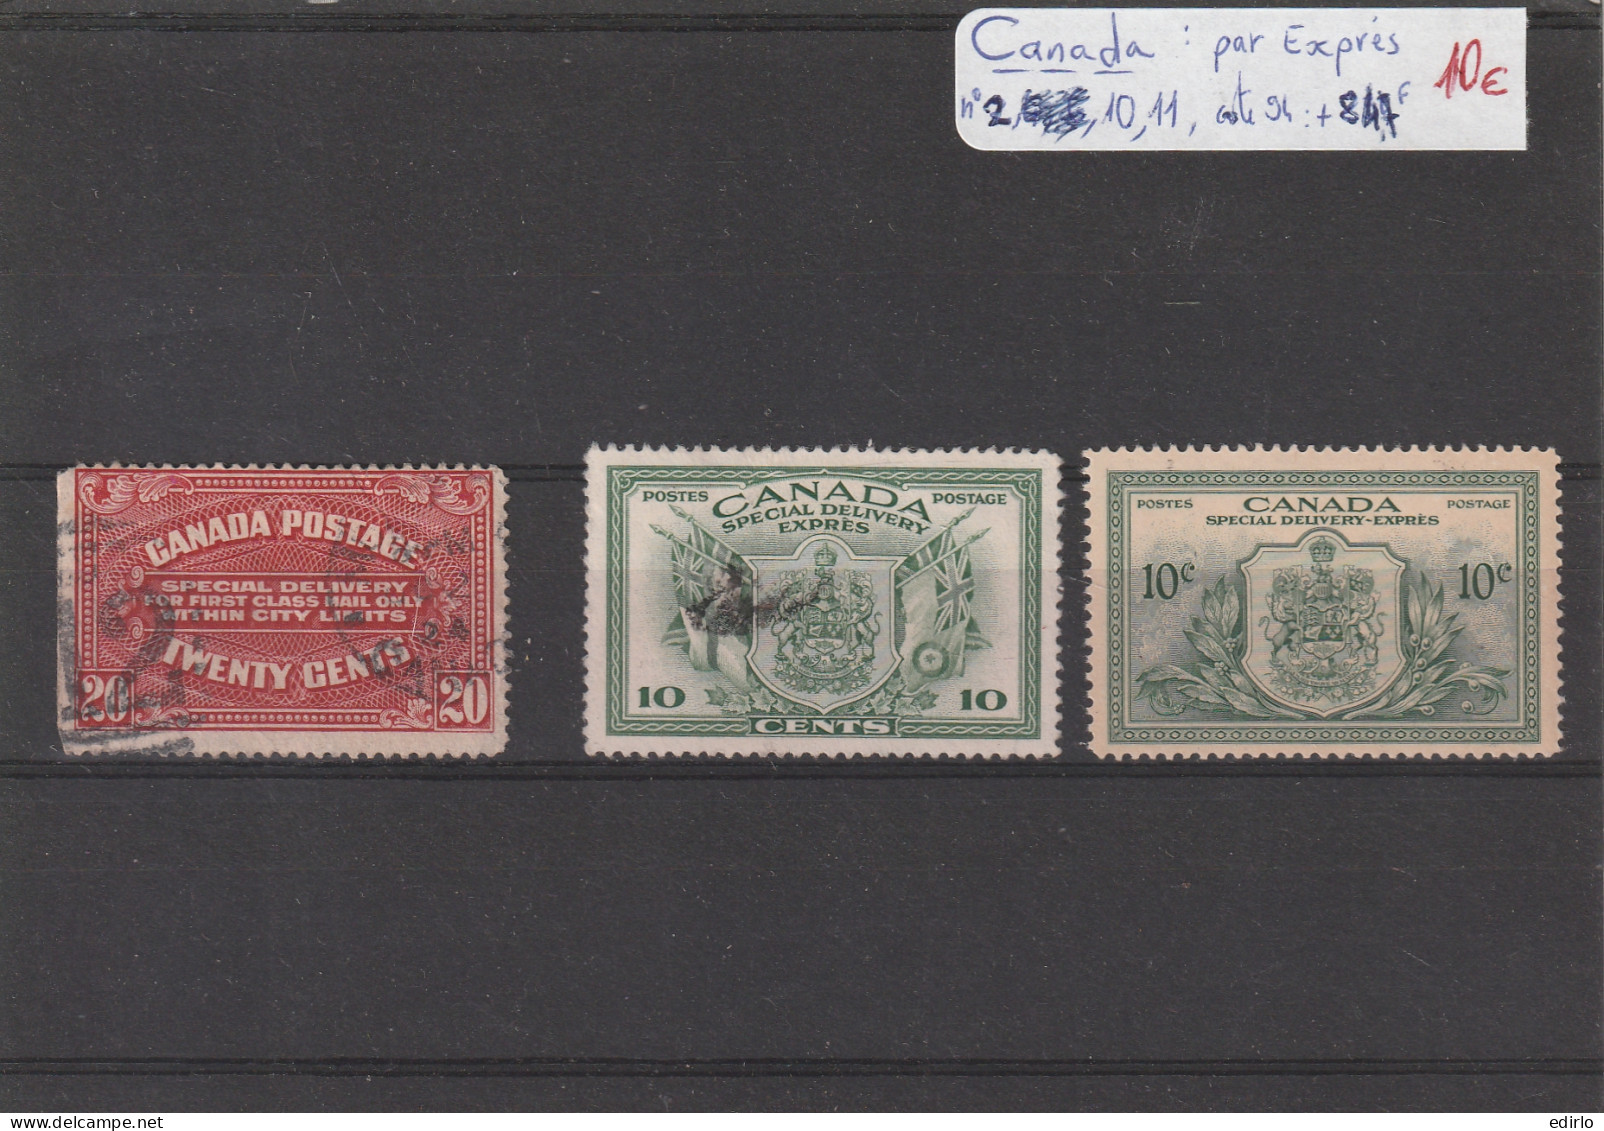 ///   CANADA EXPRESS  ///  3 Timbres N° 2 Obl - N° 10 Sans Gomme N° 11 Charniere Legere  - Correo Urgente